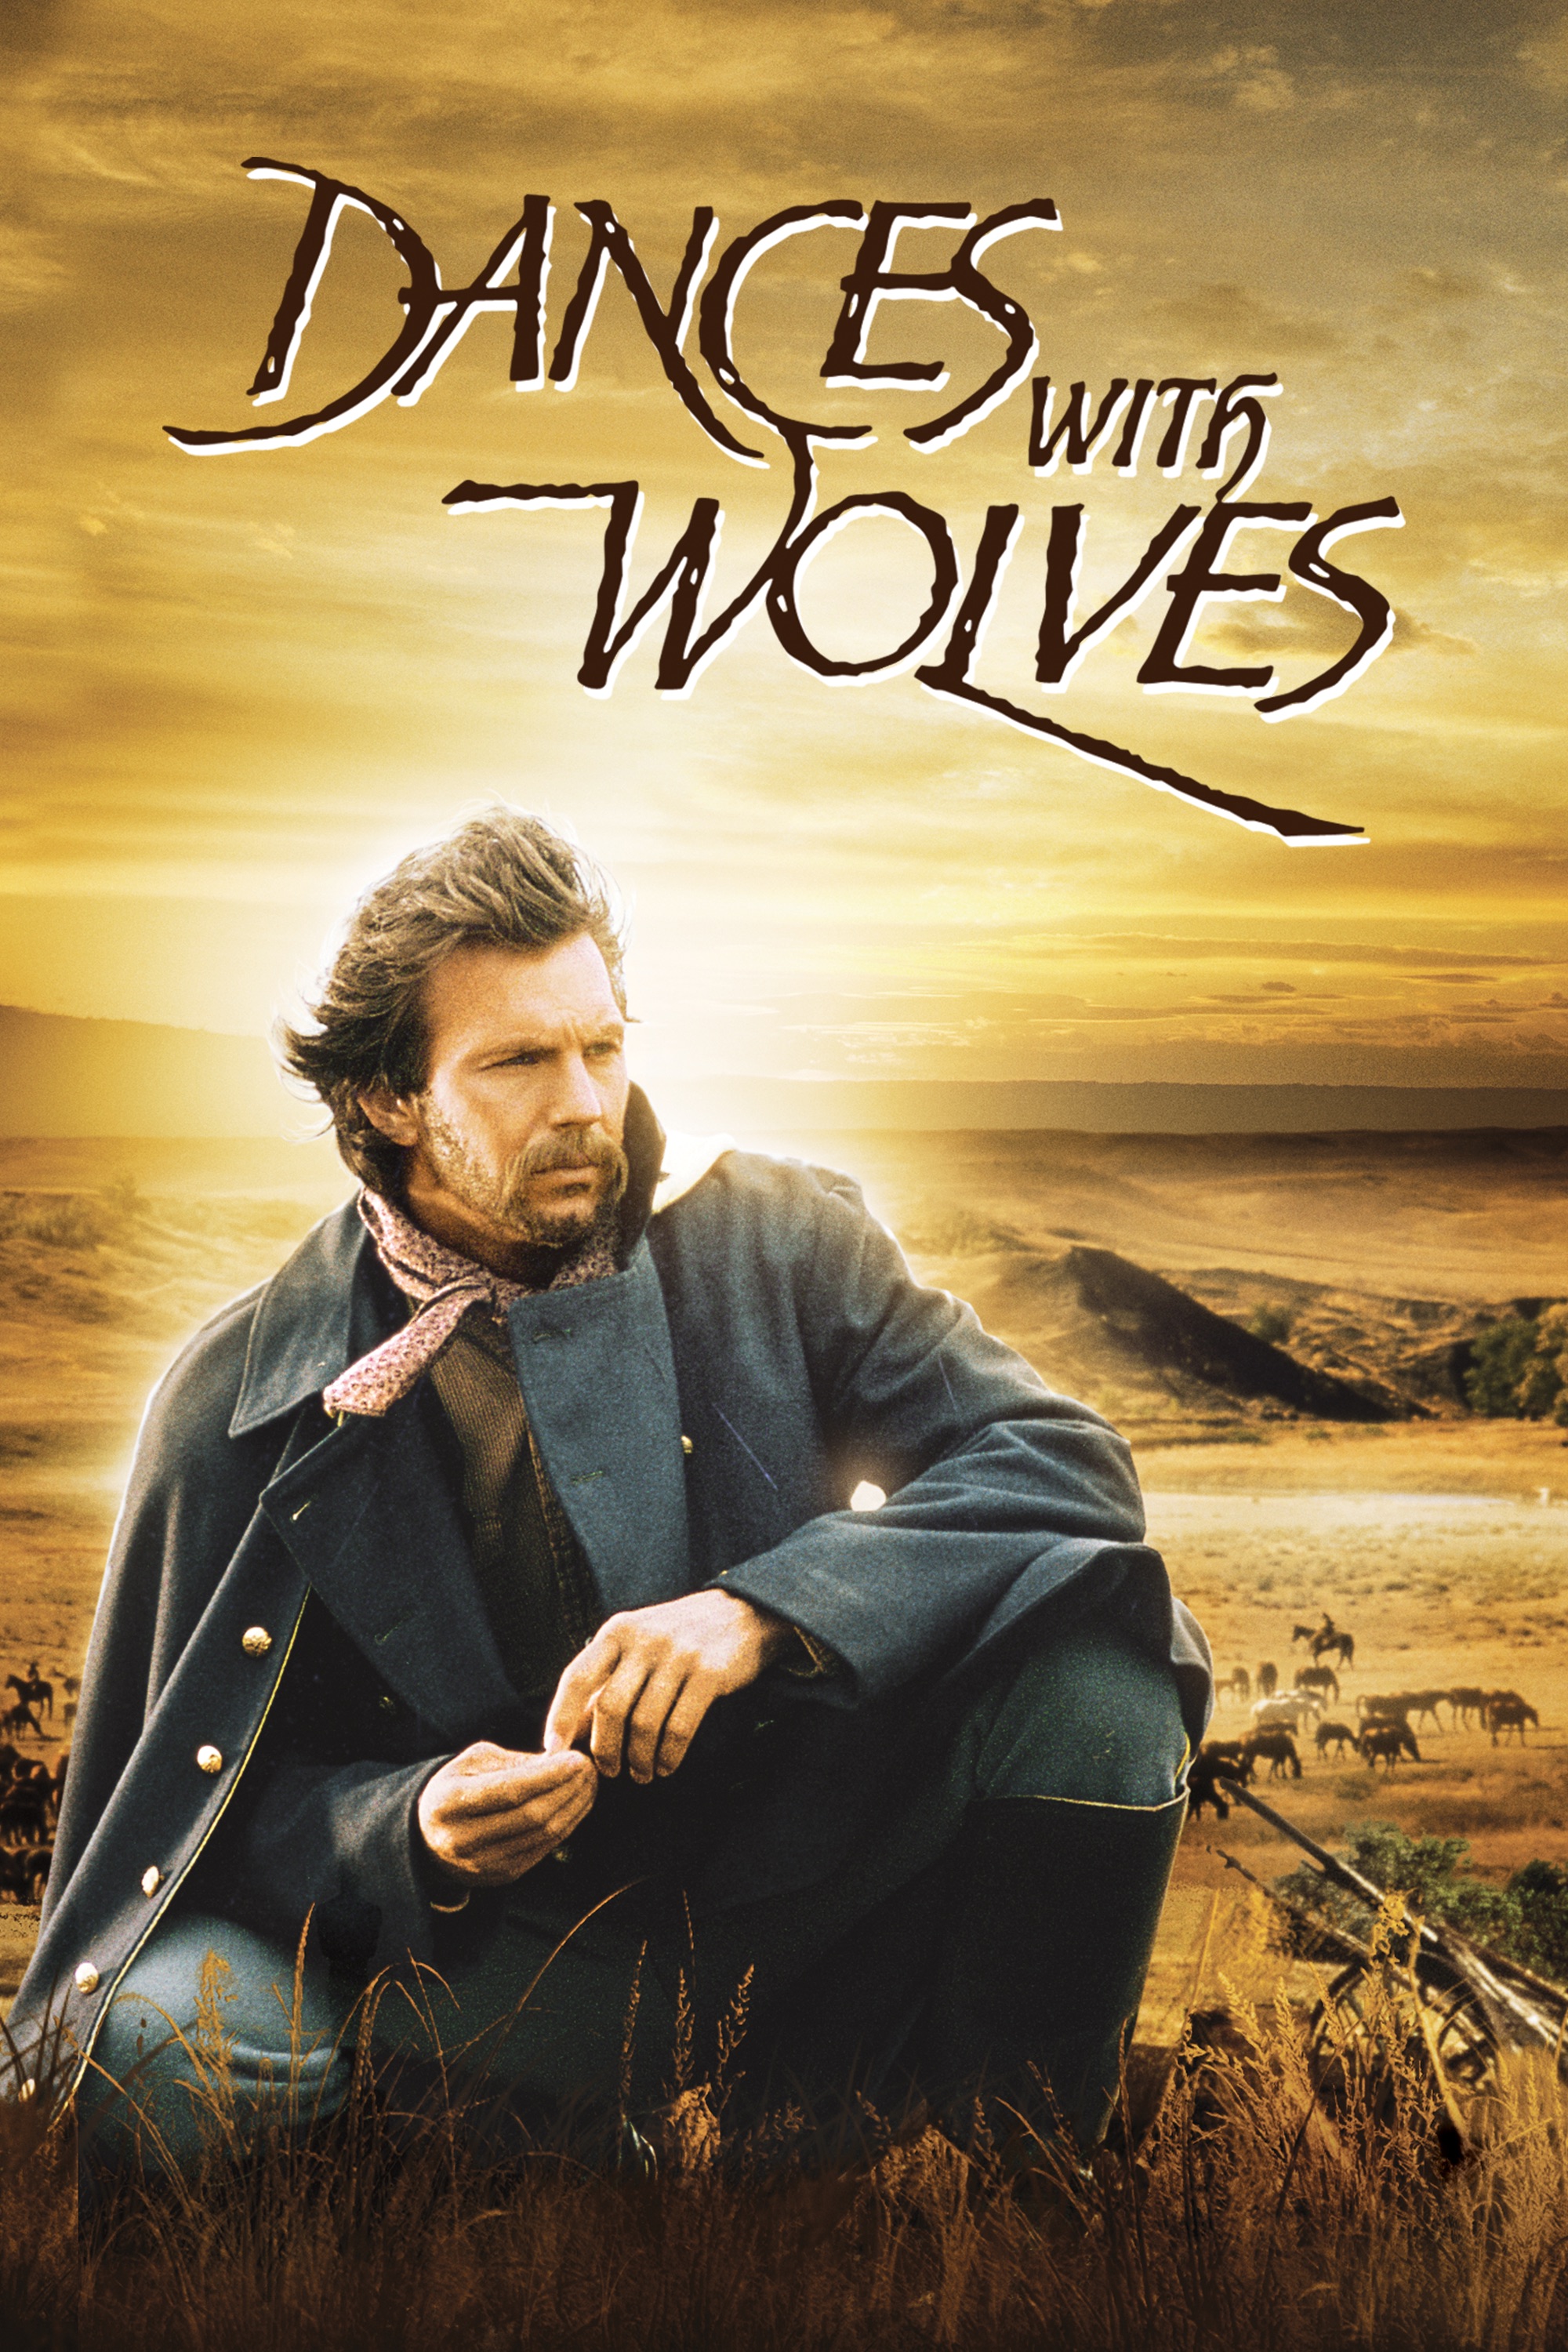 the making of dances with wolves